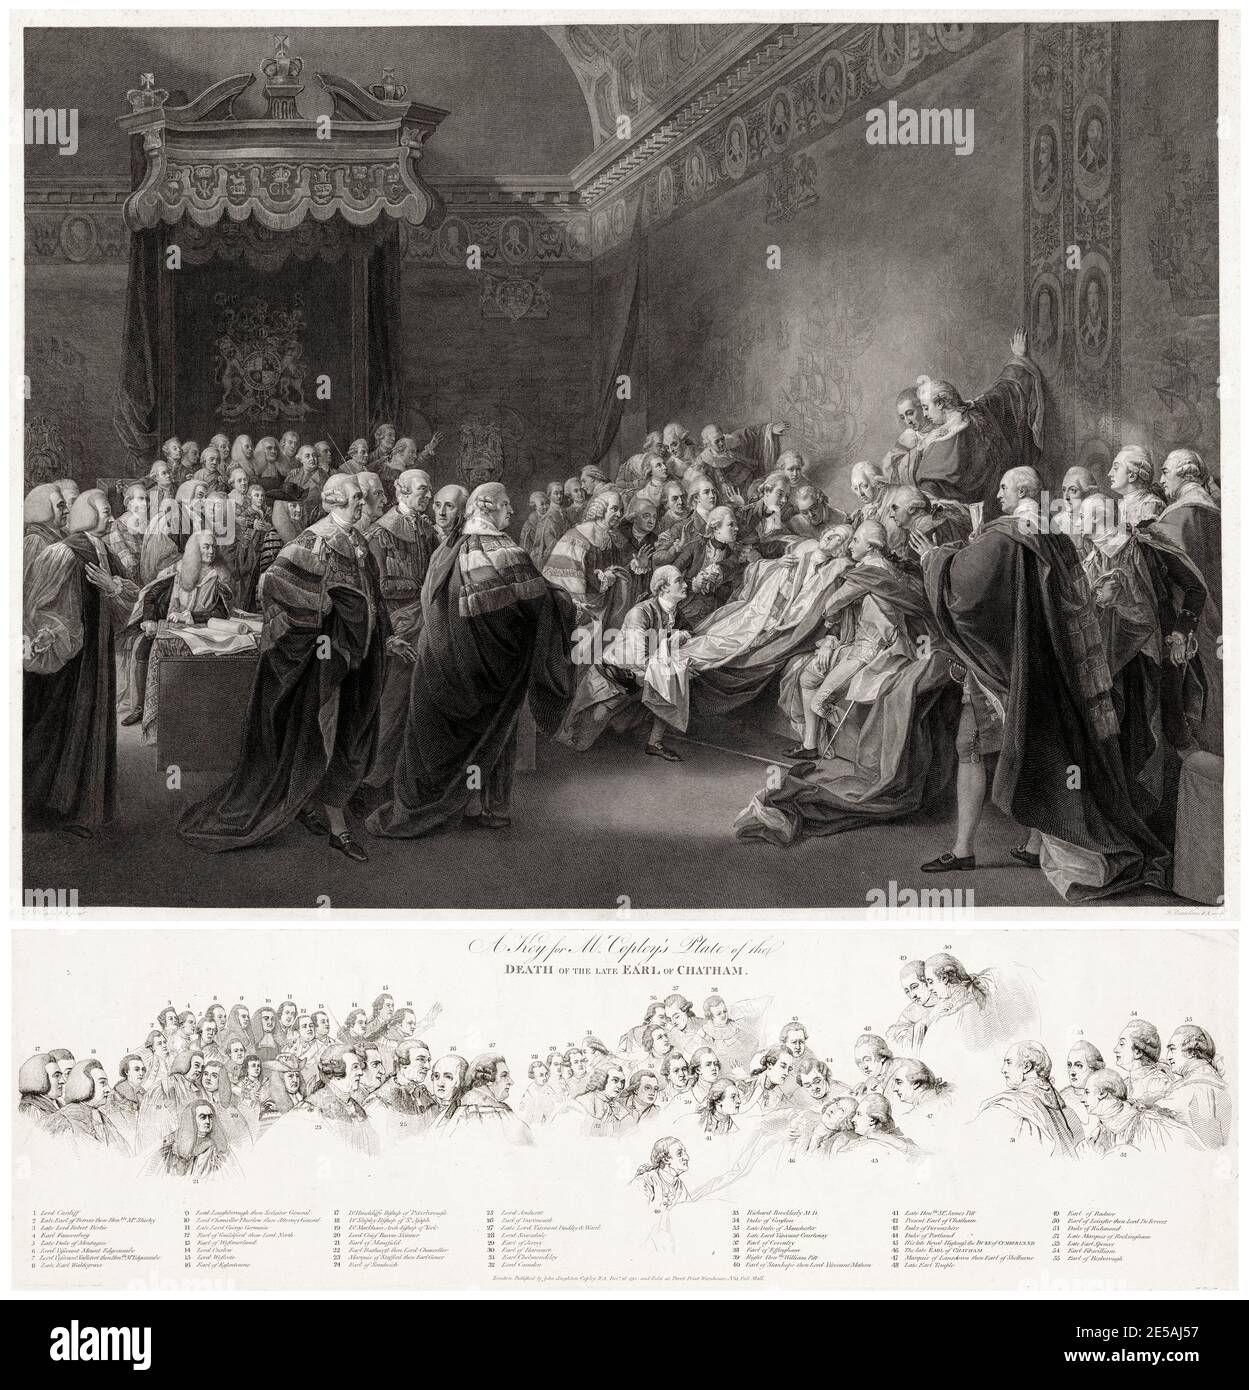 The Death of the Earl of Chatham (William Pitt, 1st Earl of Chatham, 1708-1778 with a Key to the Lords pictured), engraving by Francesco Bartolozzi after John Singleton Copley, 1791 Stock Photo